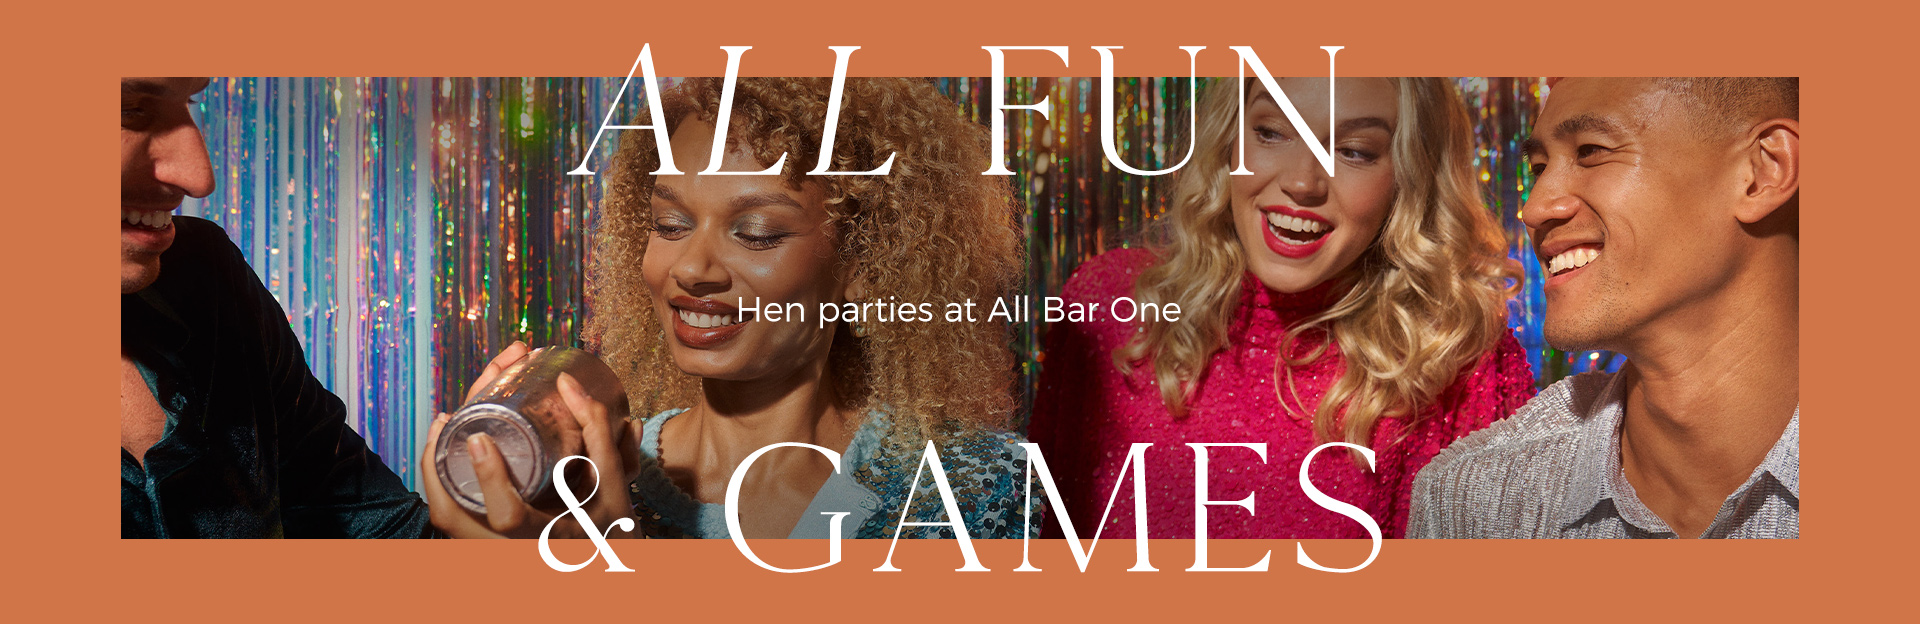 Hen parties at All Bar One Southampton